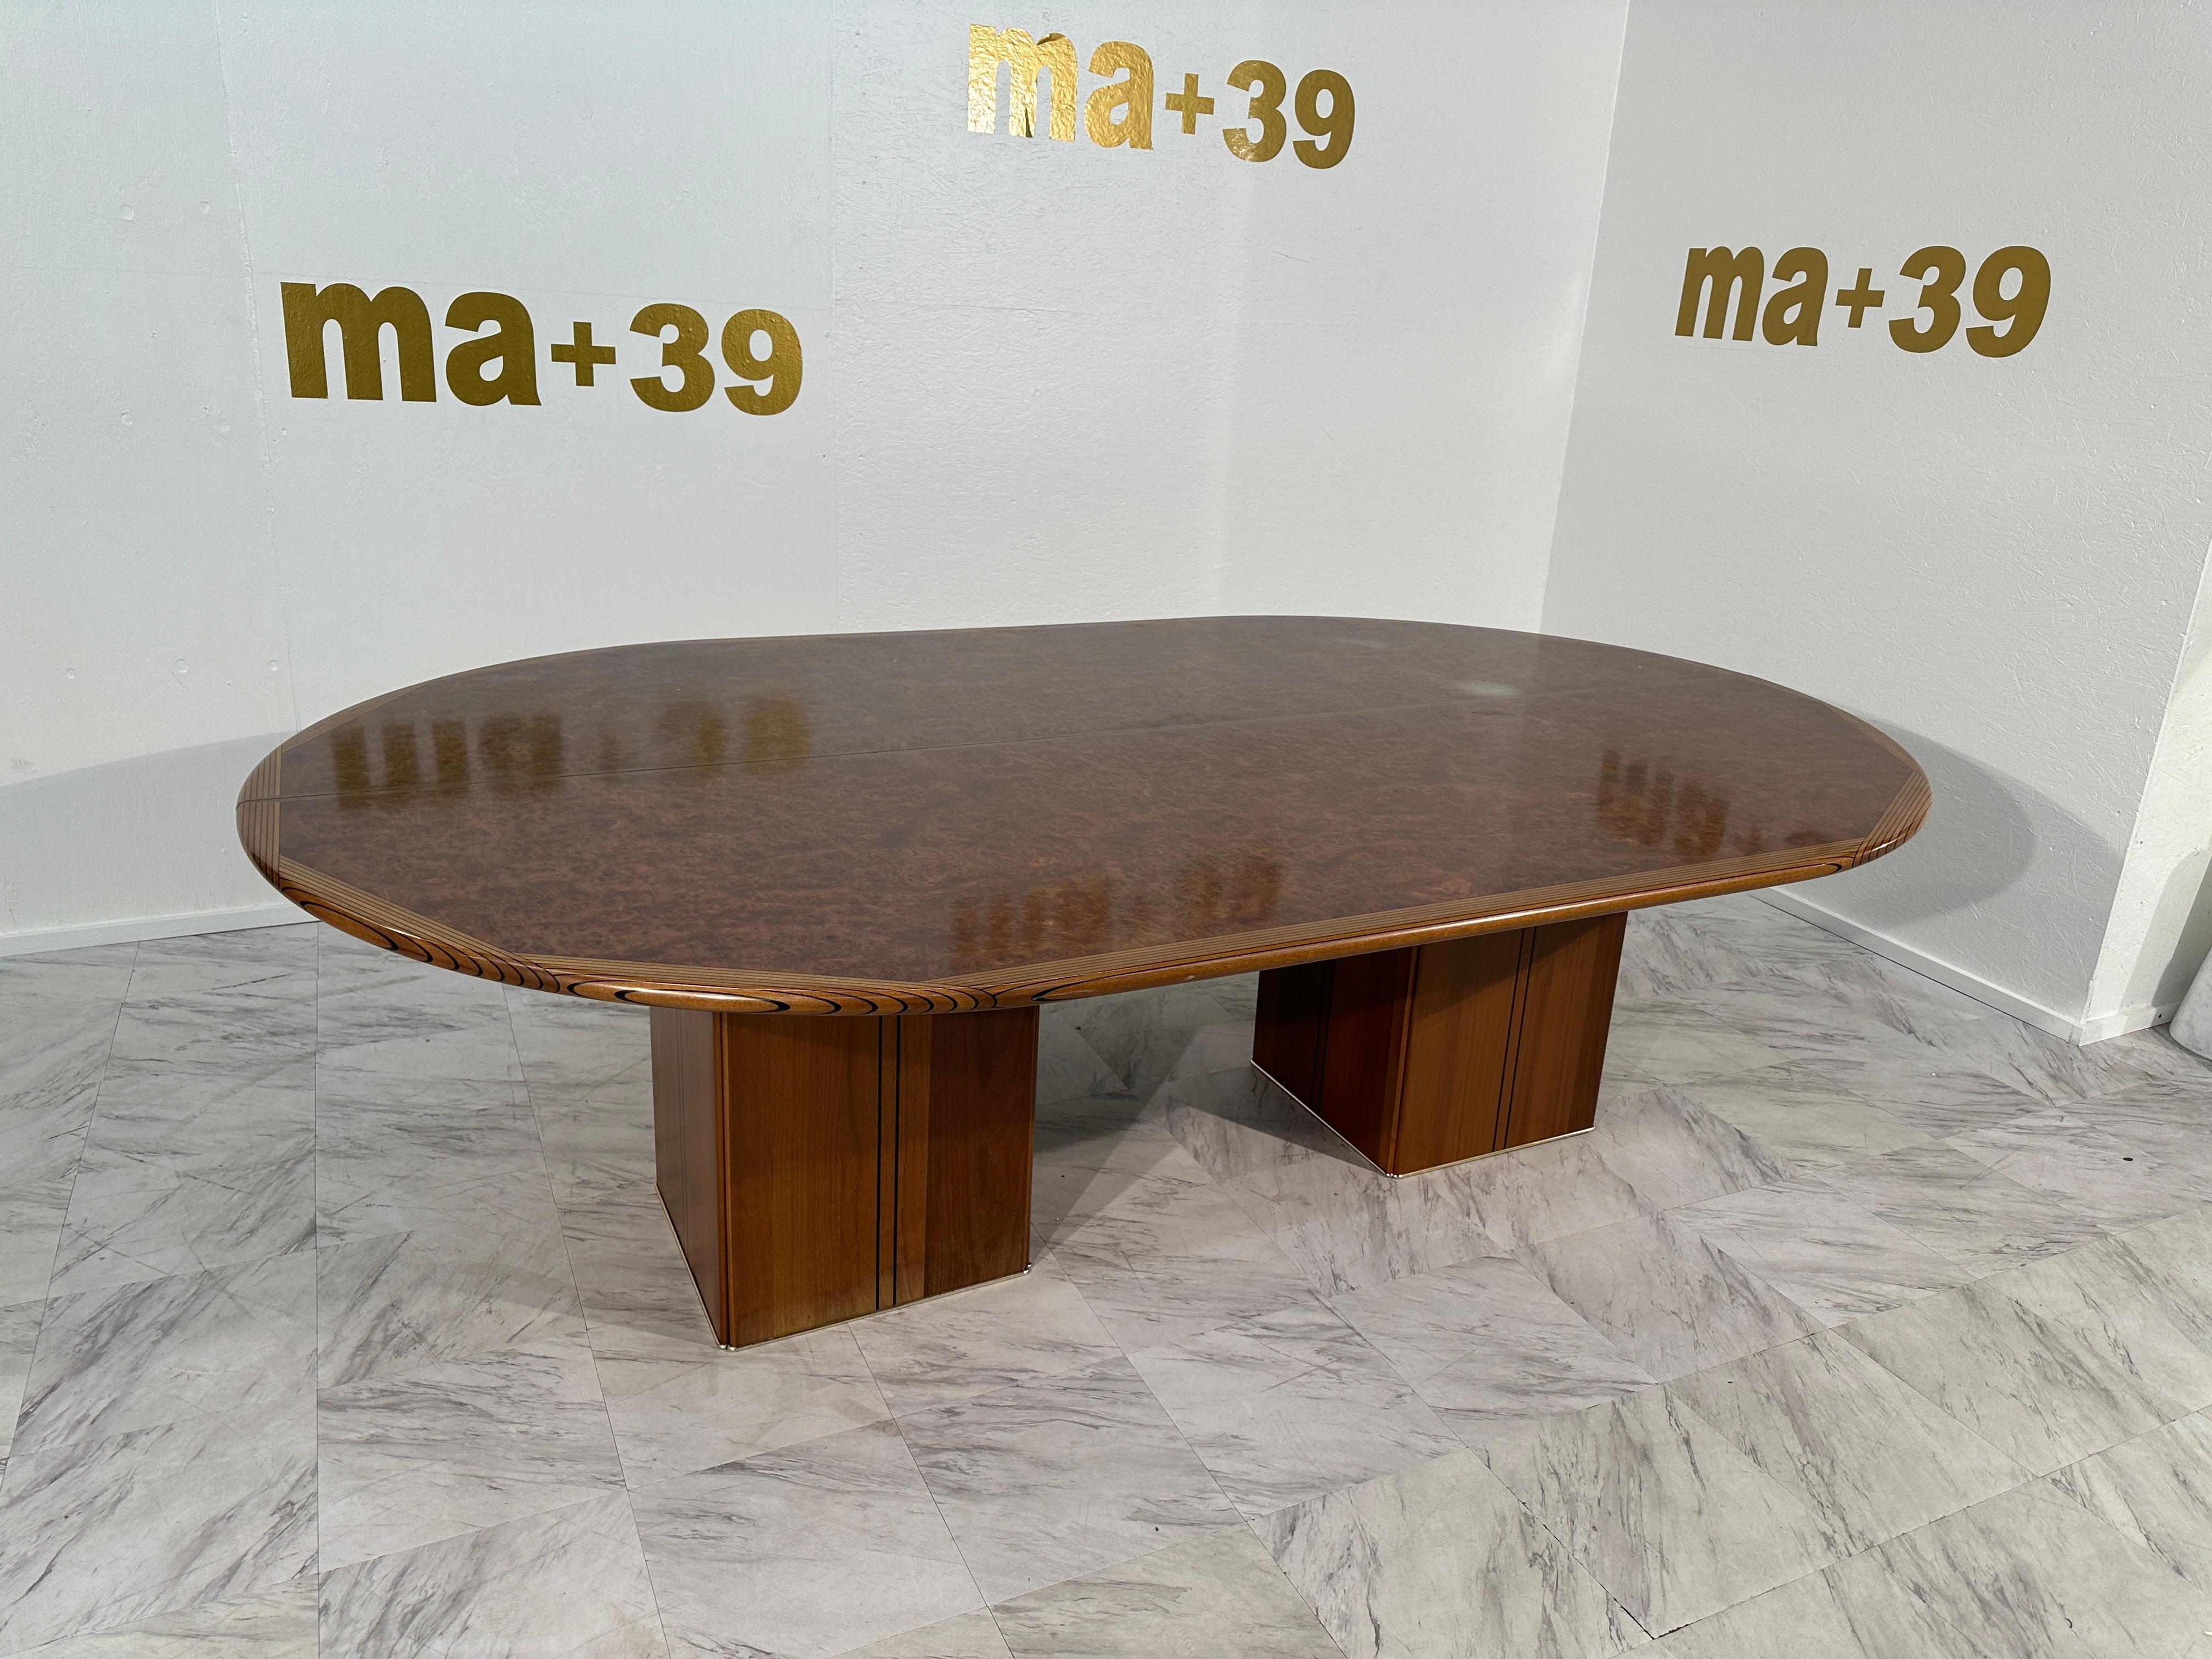 The Tobia & Afra Scarpa Large Africa Wooden Conference Table by Maxalto, hailing from 1970s Italy, epitomizes the sleek sophistication and craftsmanship characteristic of Italian design during that era. This conference table is a masterpiece of form